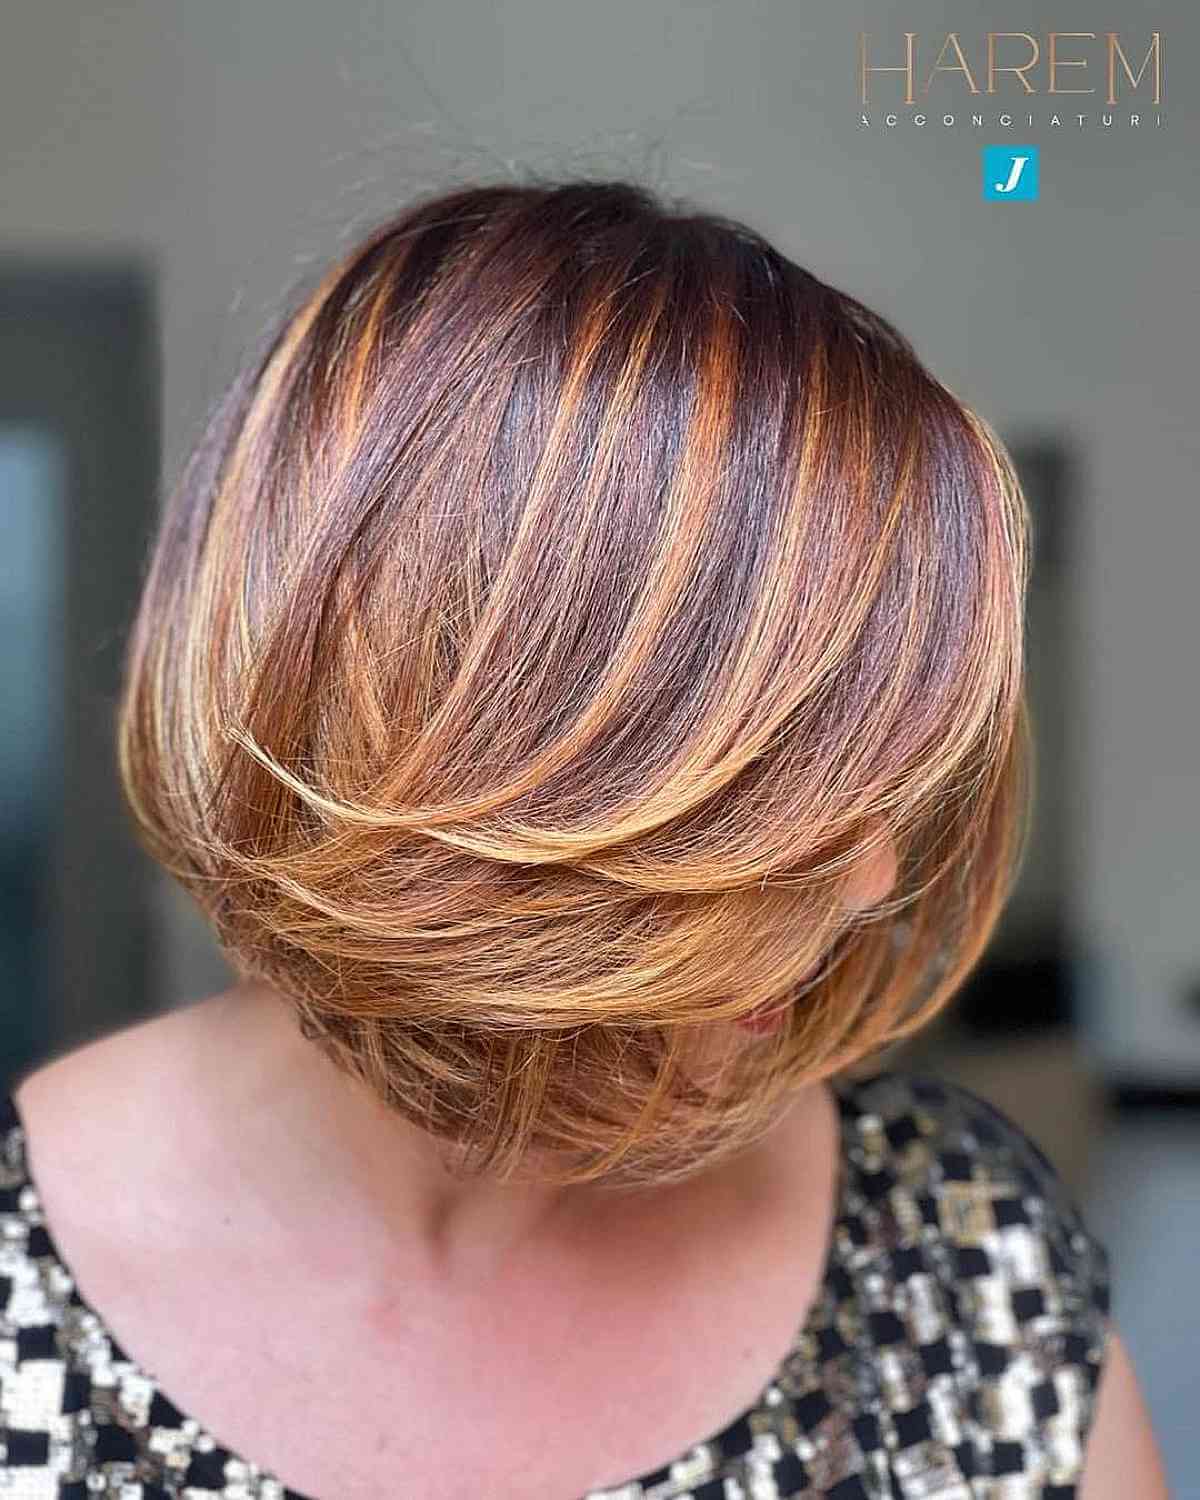 Short Light Brown Bob with Feathery Layers